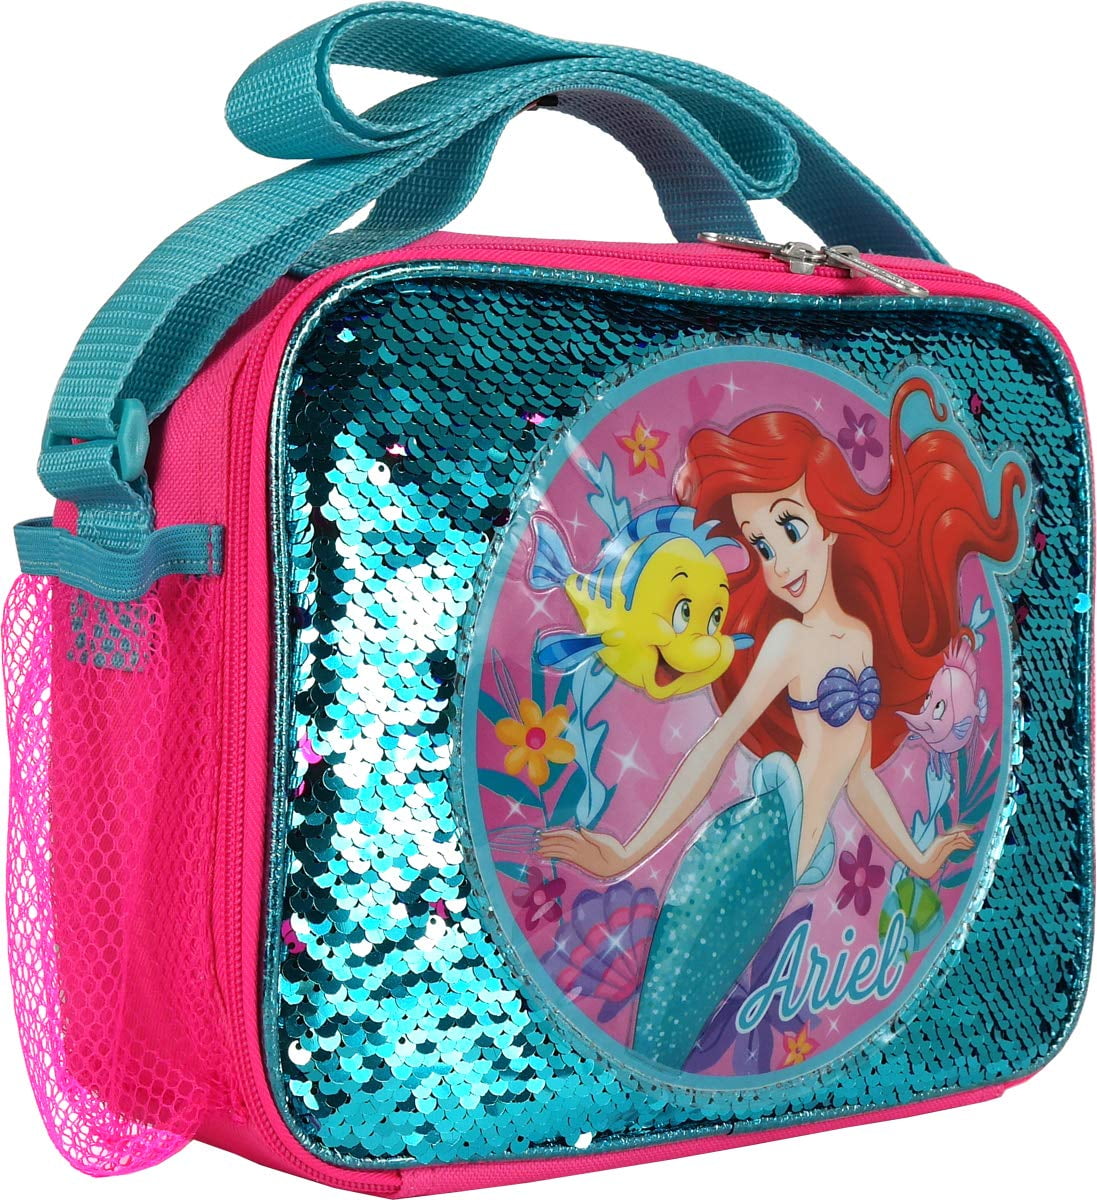 cuffslee Insulated Lunch Box Bag Mermaid Sequin Insulation Lunch Bag Childrens Portable Sequin Meal Package Aluminum Foil Preservation Bag